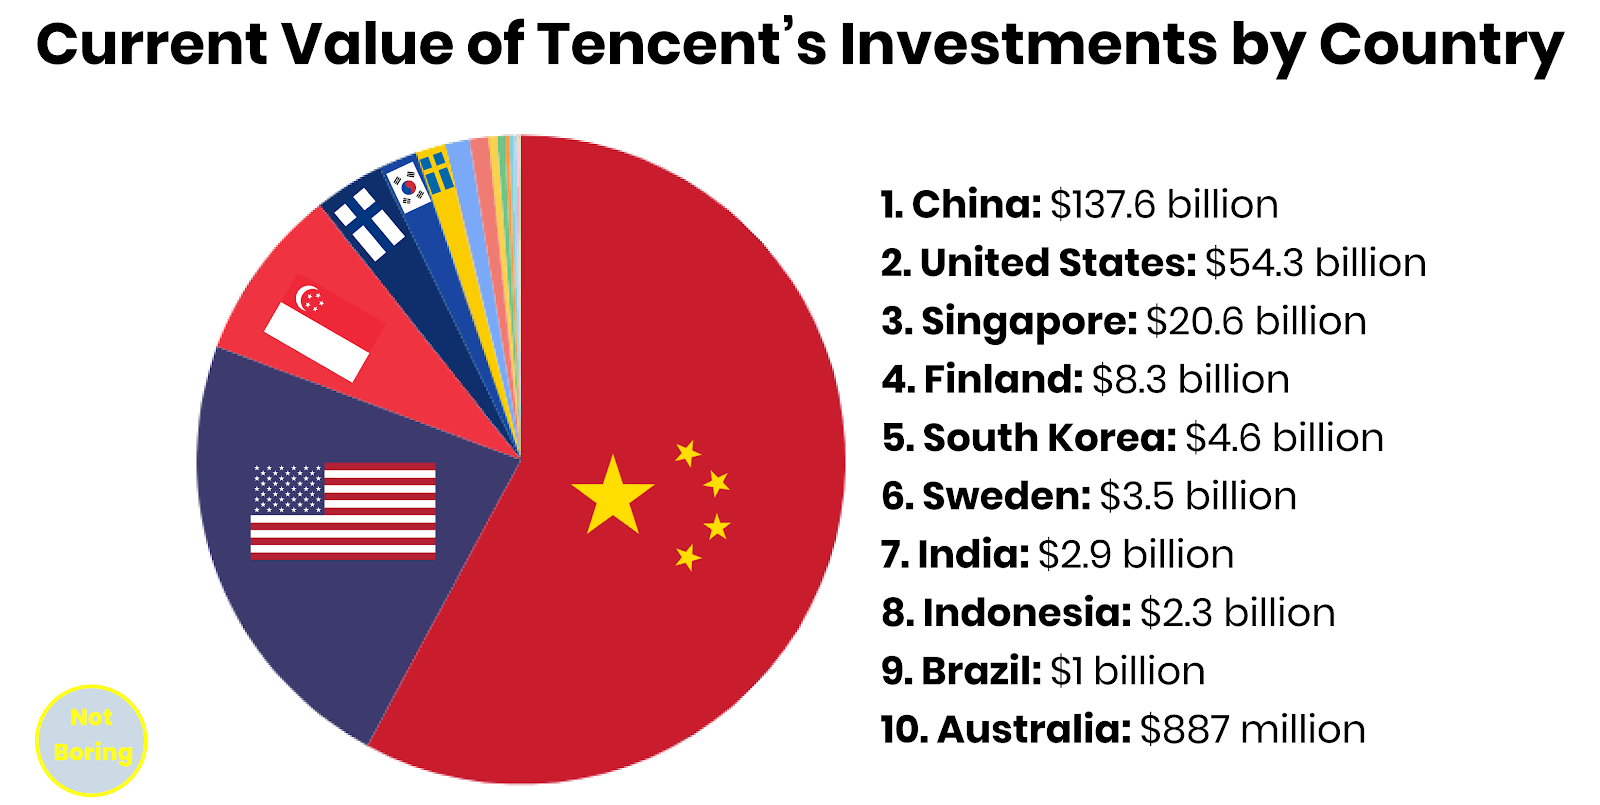 Tencent The Ultimate Outsider Part I In A Two Part Series On The Biggest Company We Know The Least About Otcmkts Tcehy Seeking Alpha - 25 billion video game firm roblox and chinas tencent